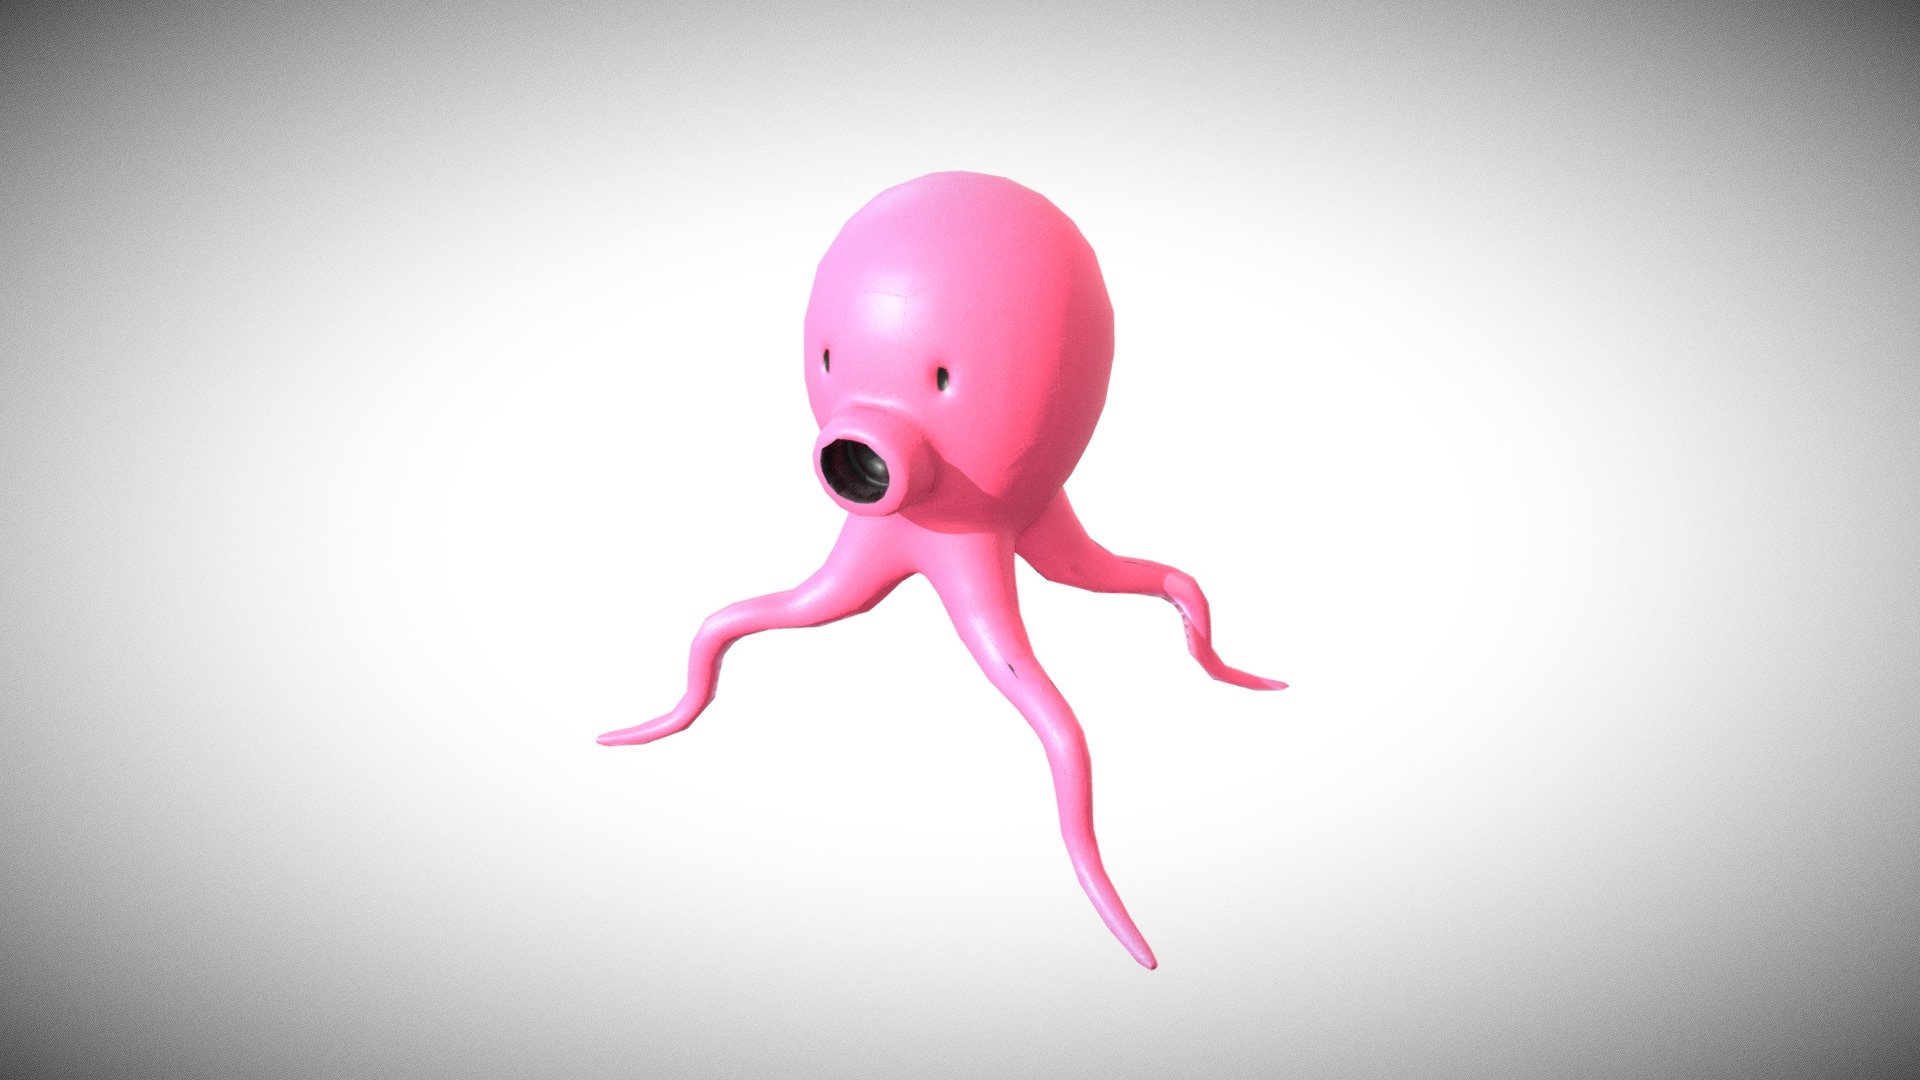 Octopus cartoon low-polygon create from Workshop in Blender Basic Modeling class - Octopus cartoon low-polygon - Download Free 3D model by ヨペス the 主夫 (@noobdaddy1980) 3d model